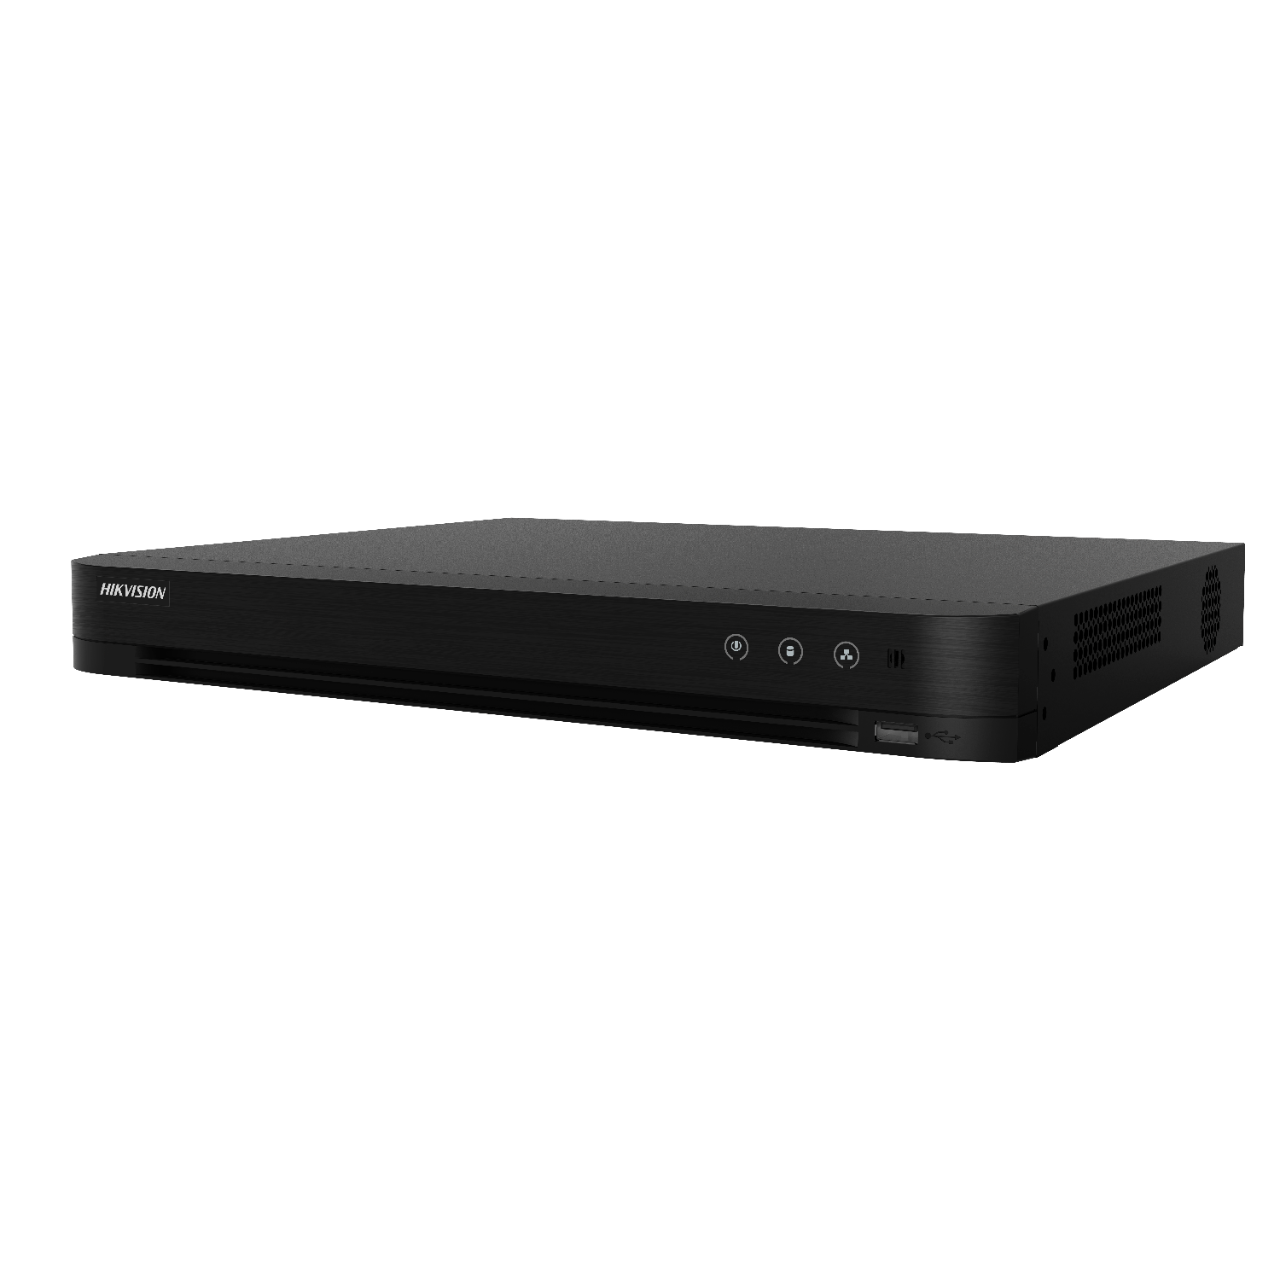 Dvr acusense 16 ch. video 8mp, audio 'over coaxial' - hikvision ids-7216huhi-m2-s